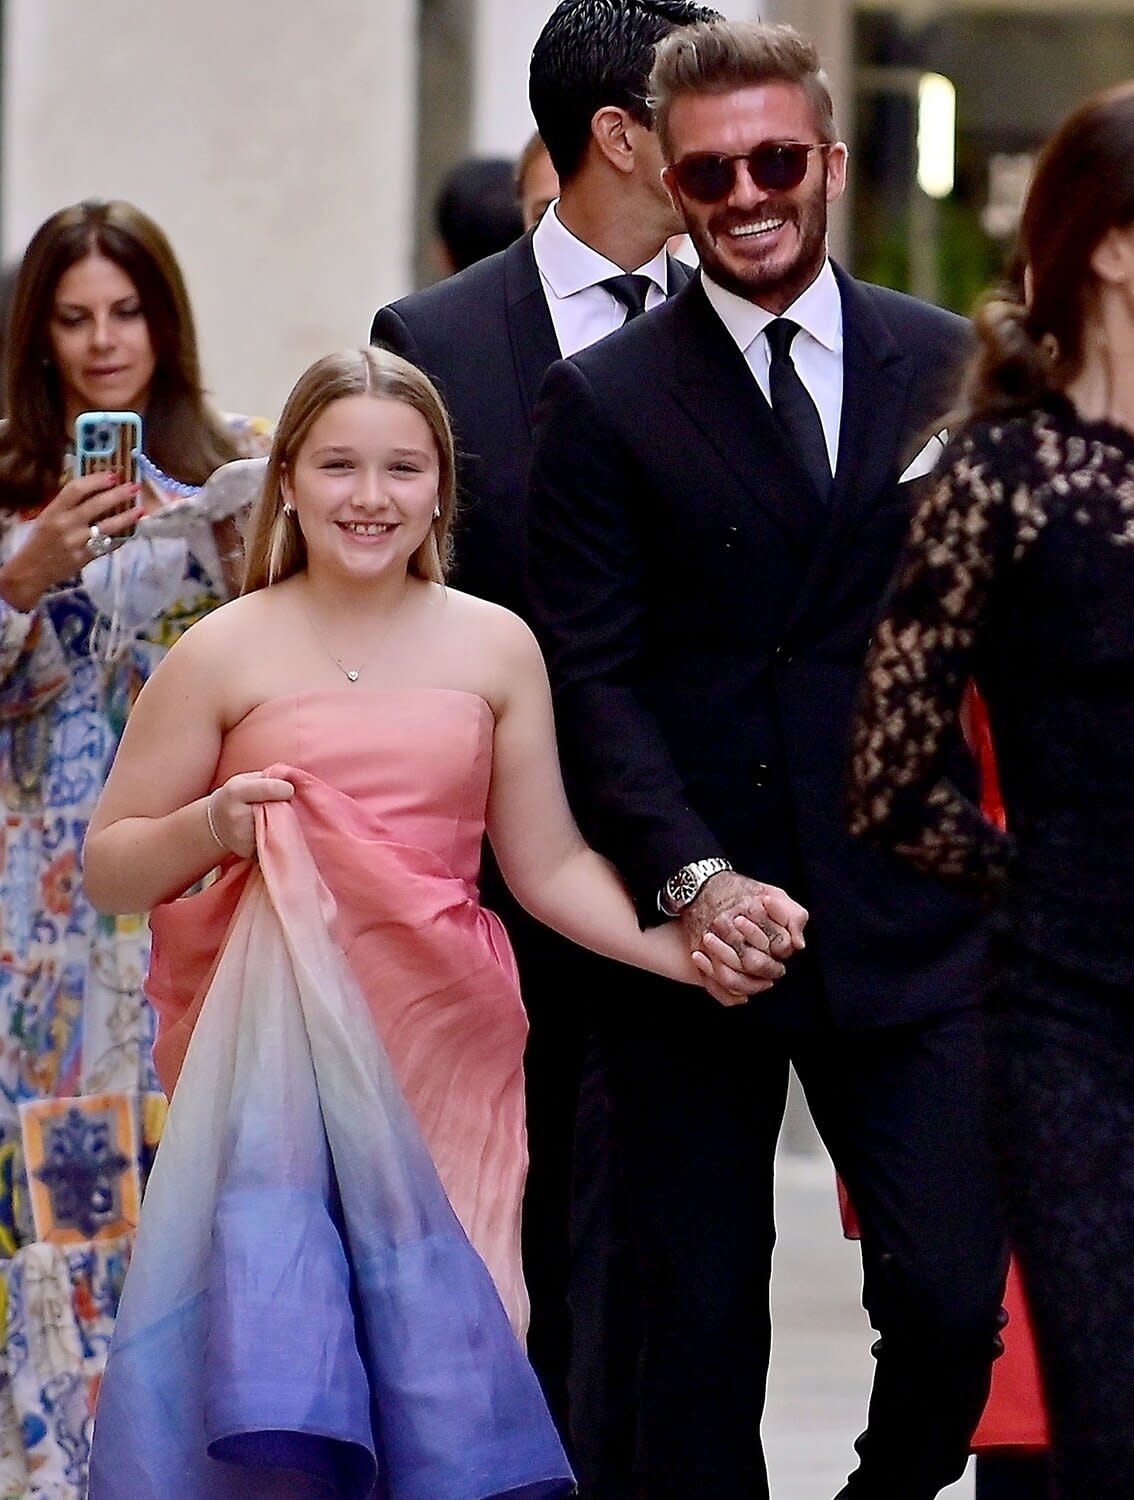 David Beckham Walks Hand-in-Hand with Daughter Harper, 10, at Special Event in Italy — See the Pic!